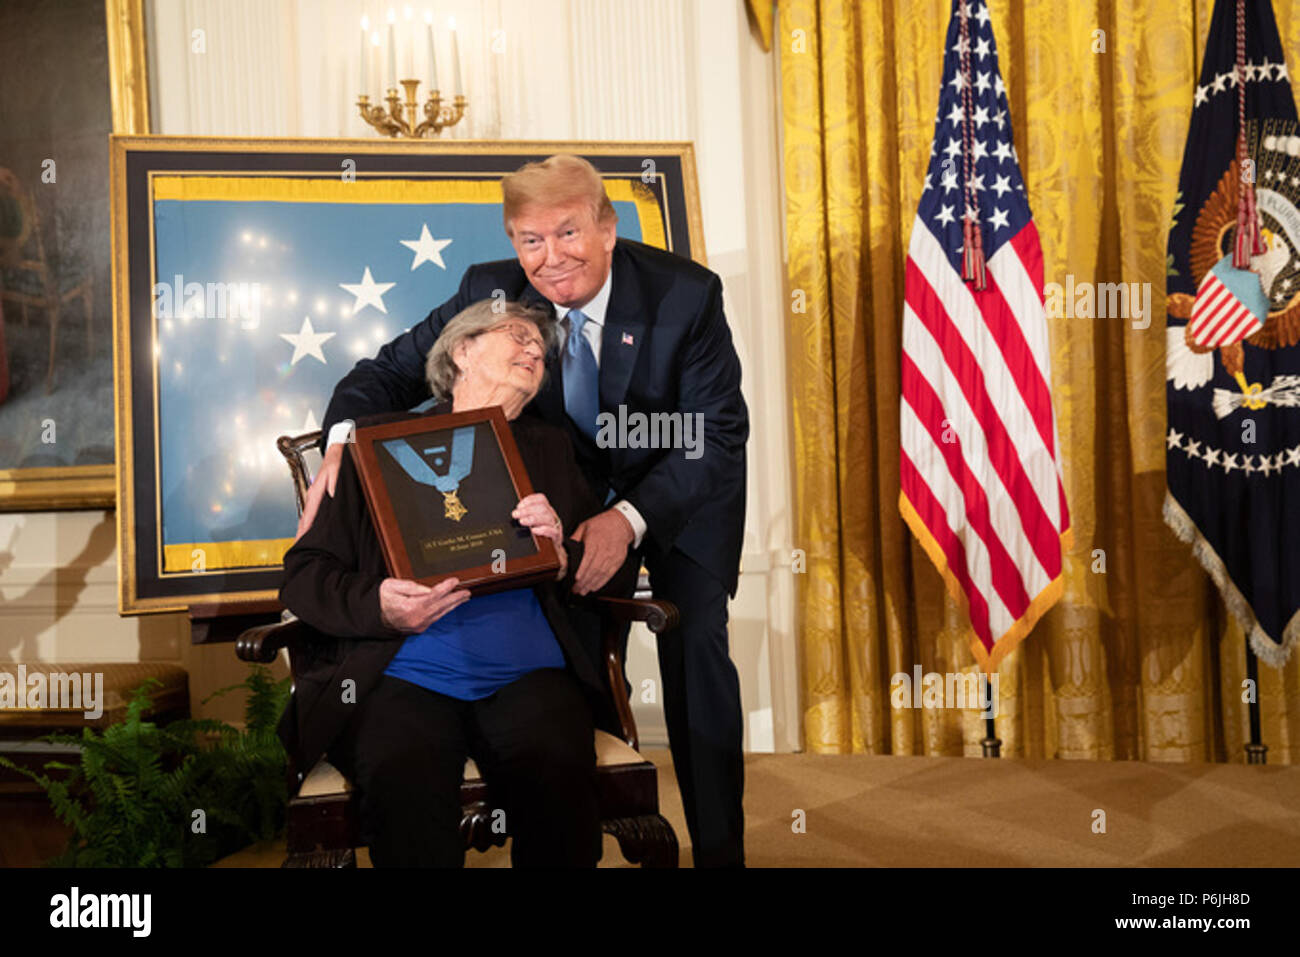 WASHINGTON, DC - WEEK OF JUNE 24: President Donald J. Trump presents the Medal of Honor to Mrs. Pauline Conner, widow of the late U.S. Army 1st Lt. Garlin Murl Conner, on Tuesday, June 26, 2018, in the East Room of the White House.  People:  President Donald Trump Stock Photo